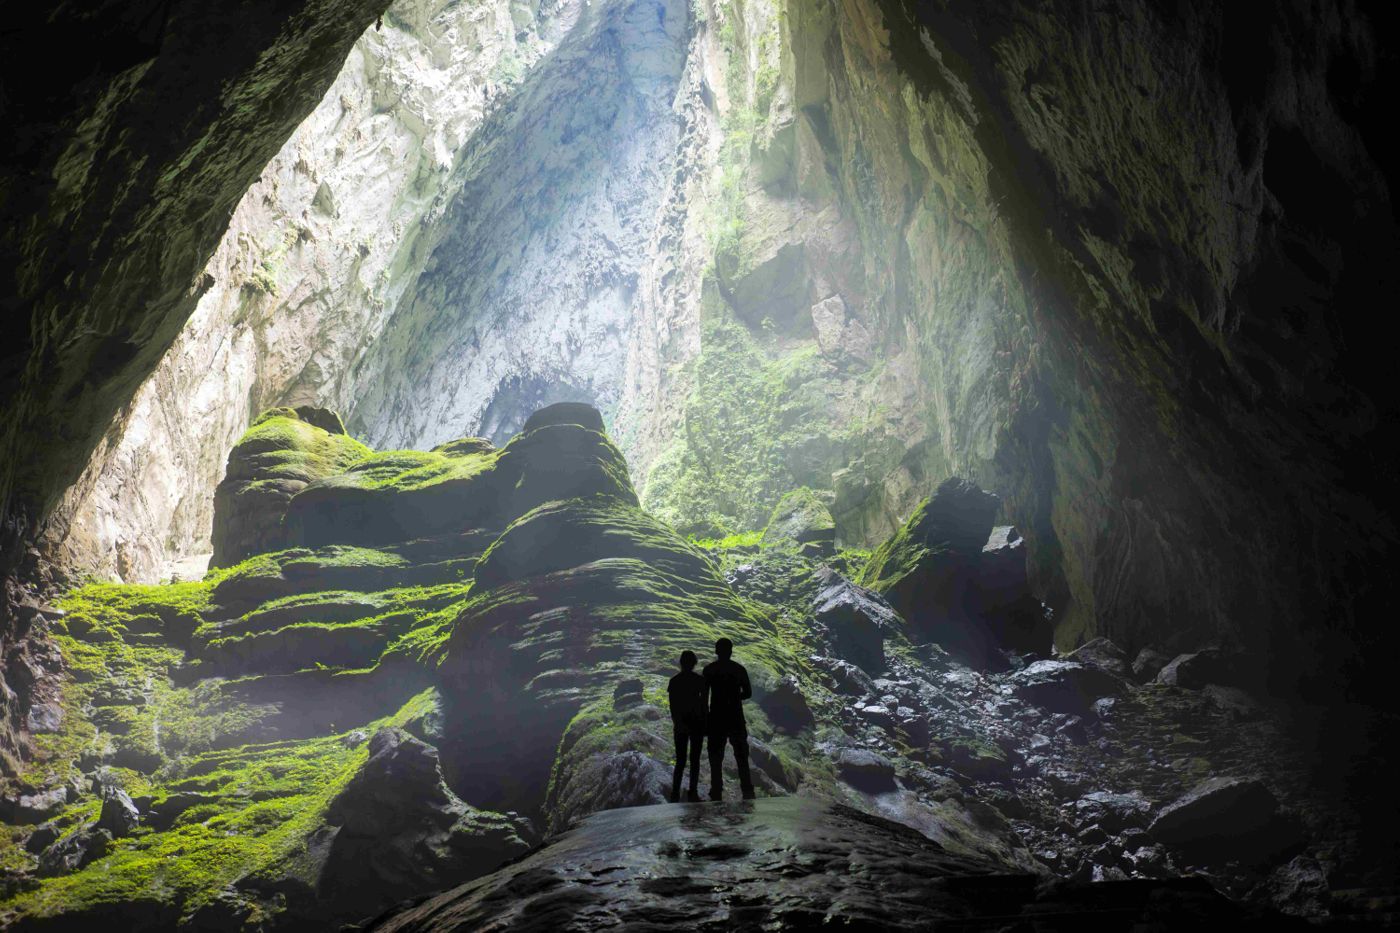 Son Doong with its wonderful beauty as a masterpiece of nature.